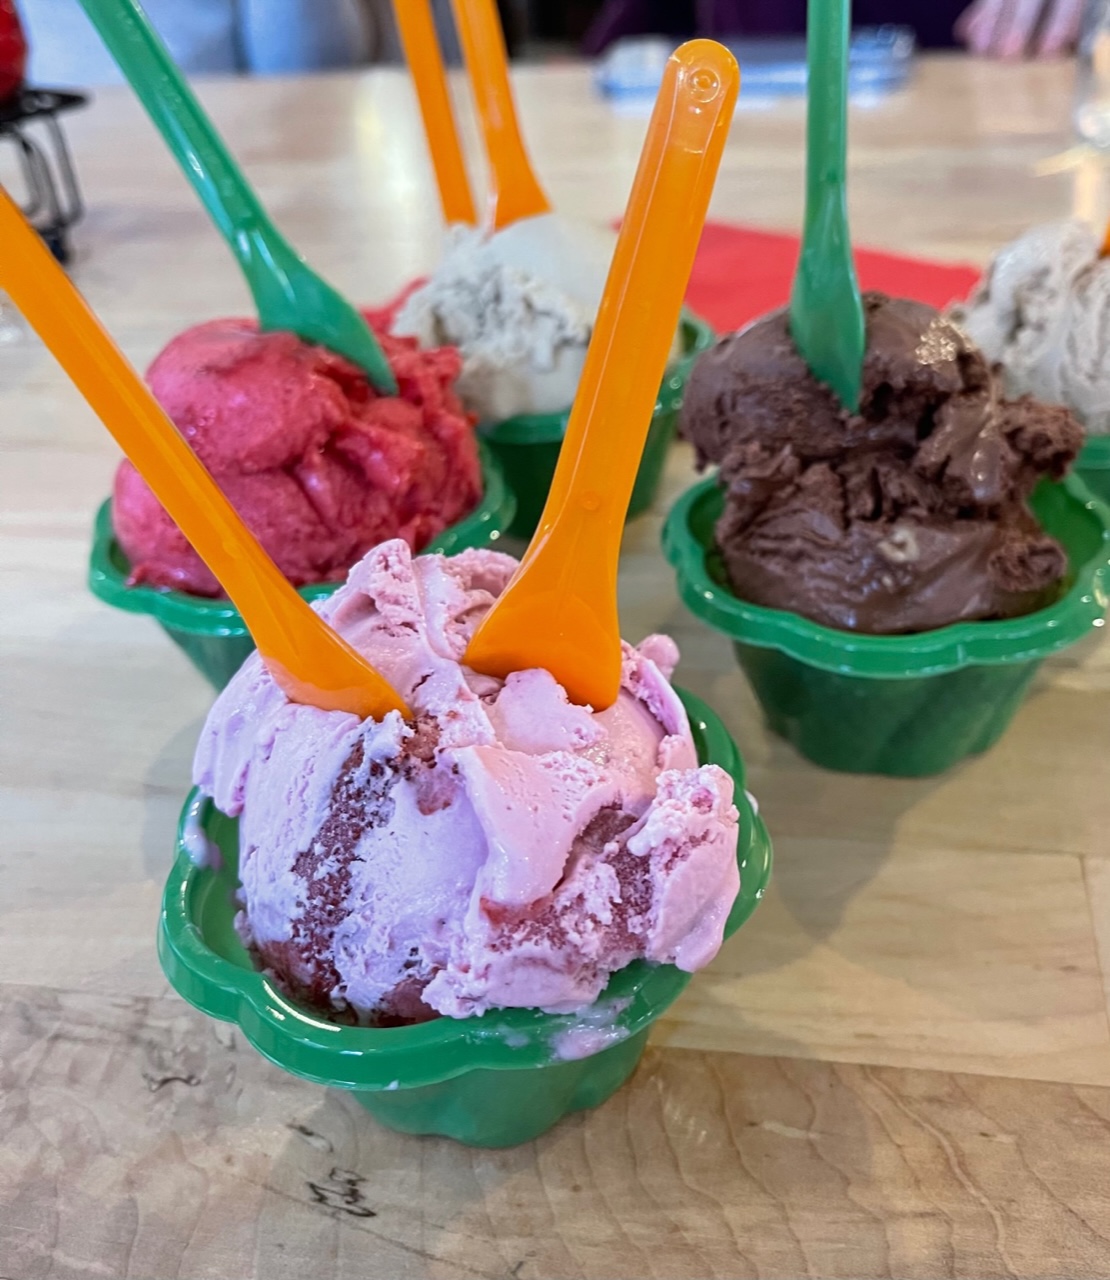 On a light wood table, there are six green cups of gelato of various flavors with plastic green spoons sticking out of them. Photo by Stephanie Wheatley.